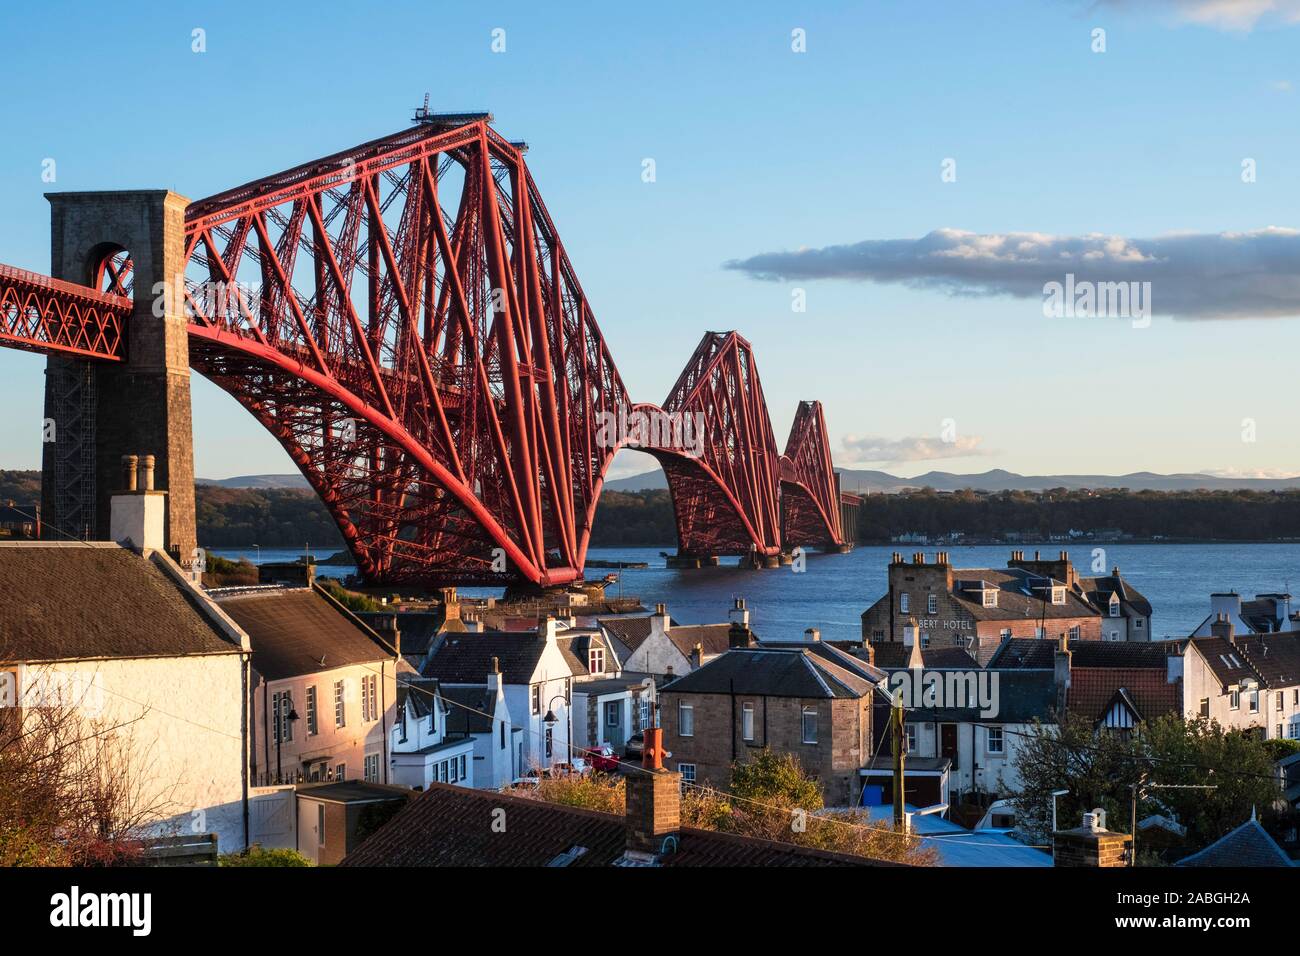 View of North Queensferry and the famous Forth Rail Bridge  spanning the Firth of Forth between Fife and West Lothian in Scotland,United Kingdom. Stock Photo